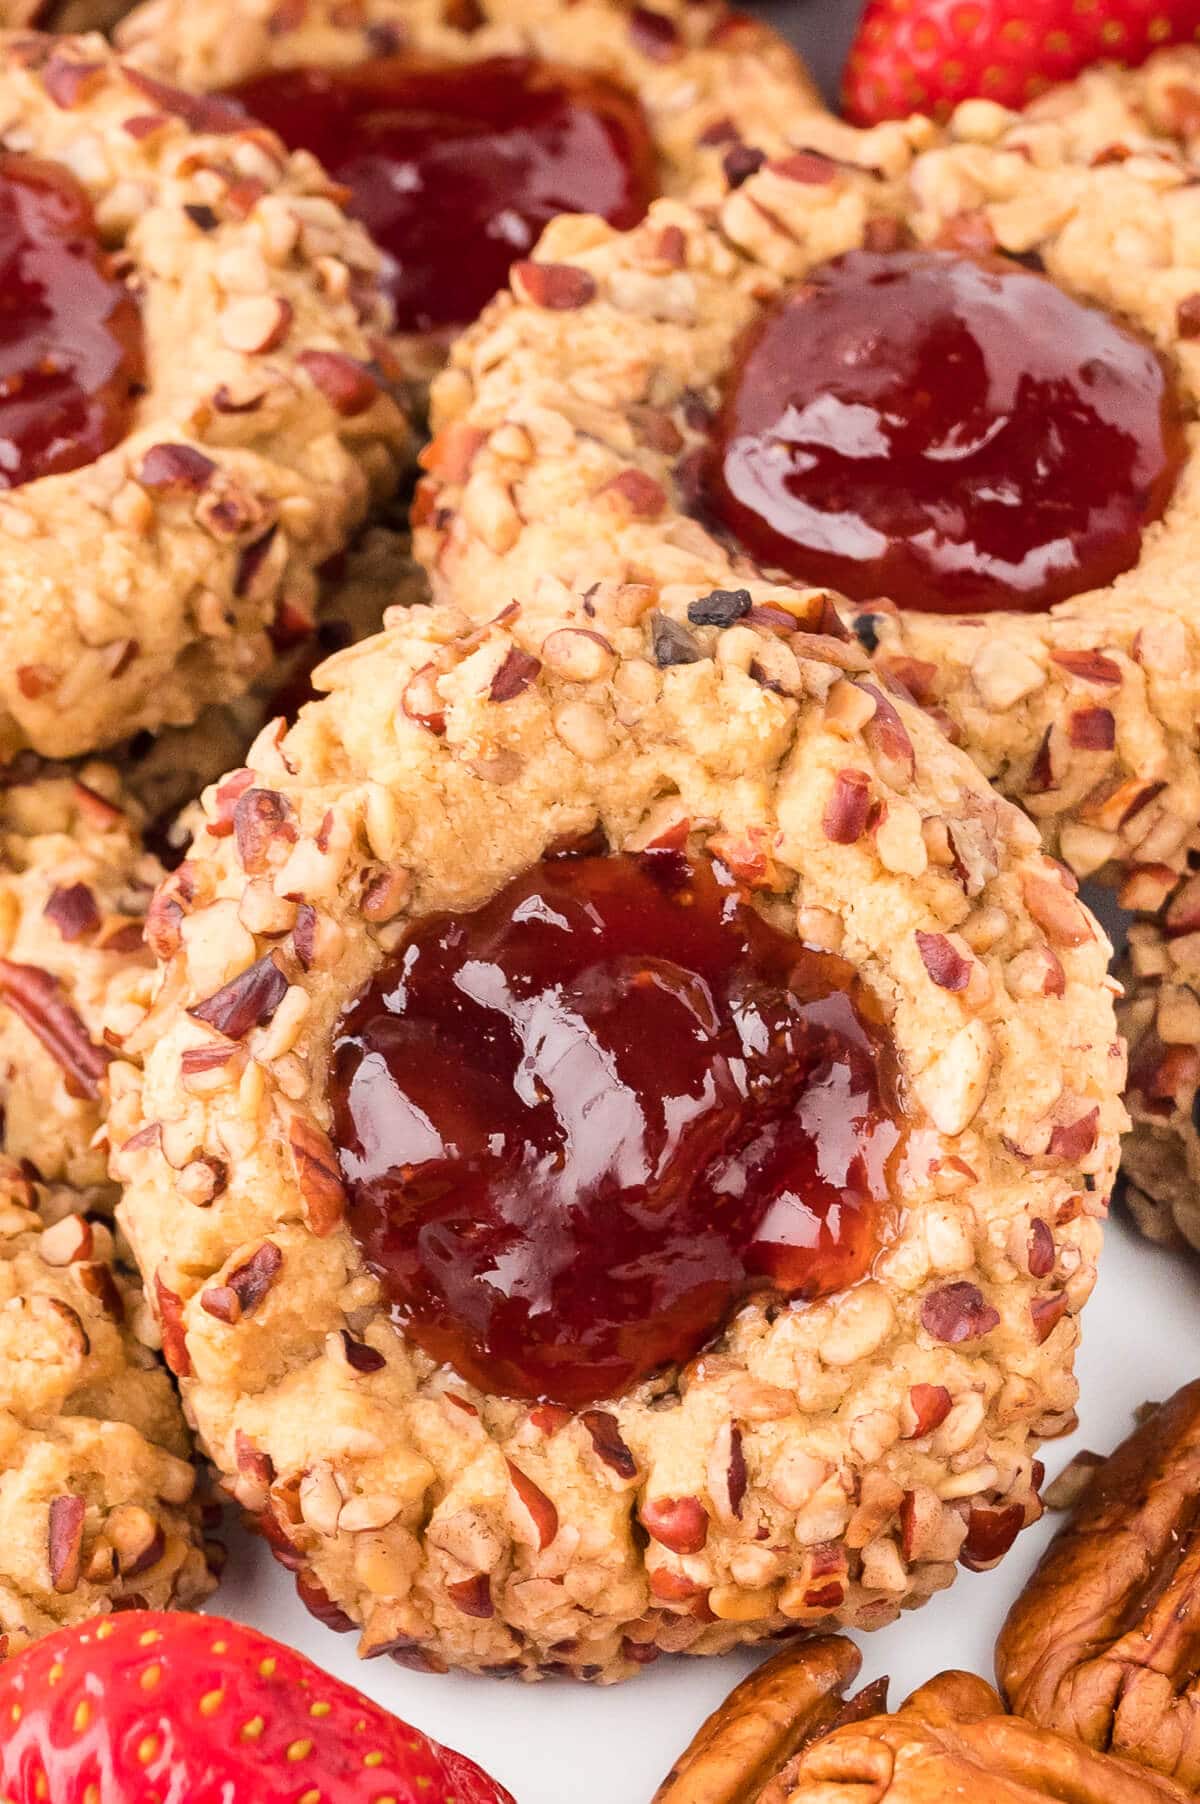 Thumbprint cookies on a plate.